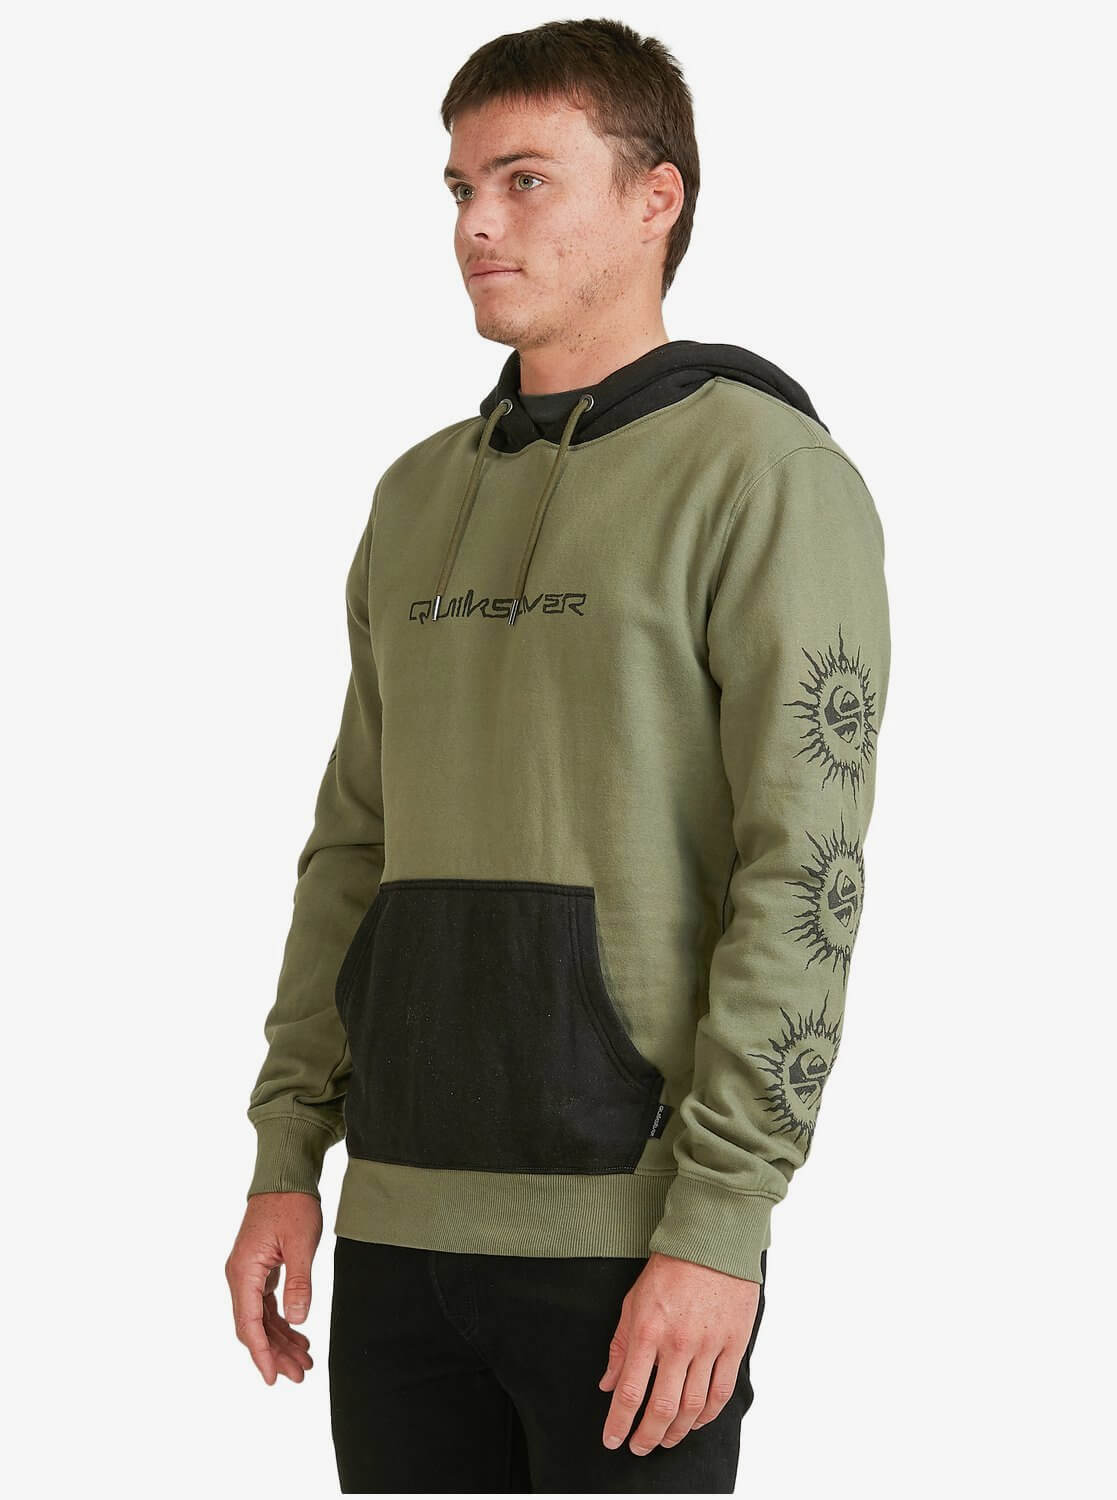 Quiksilver Mens 2020 | The 69 Capsule Surf Apparel Collection